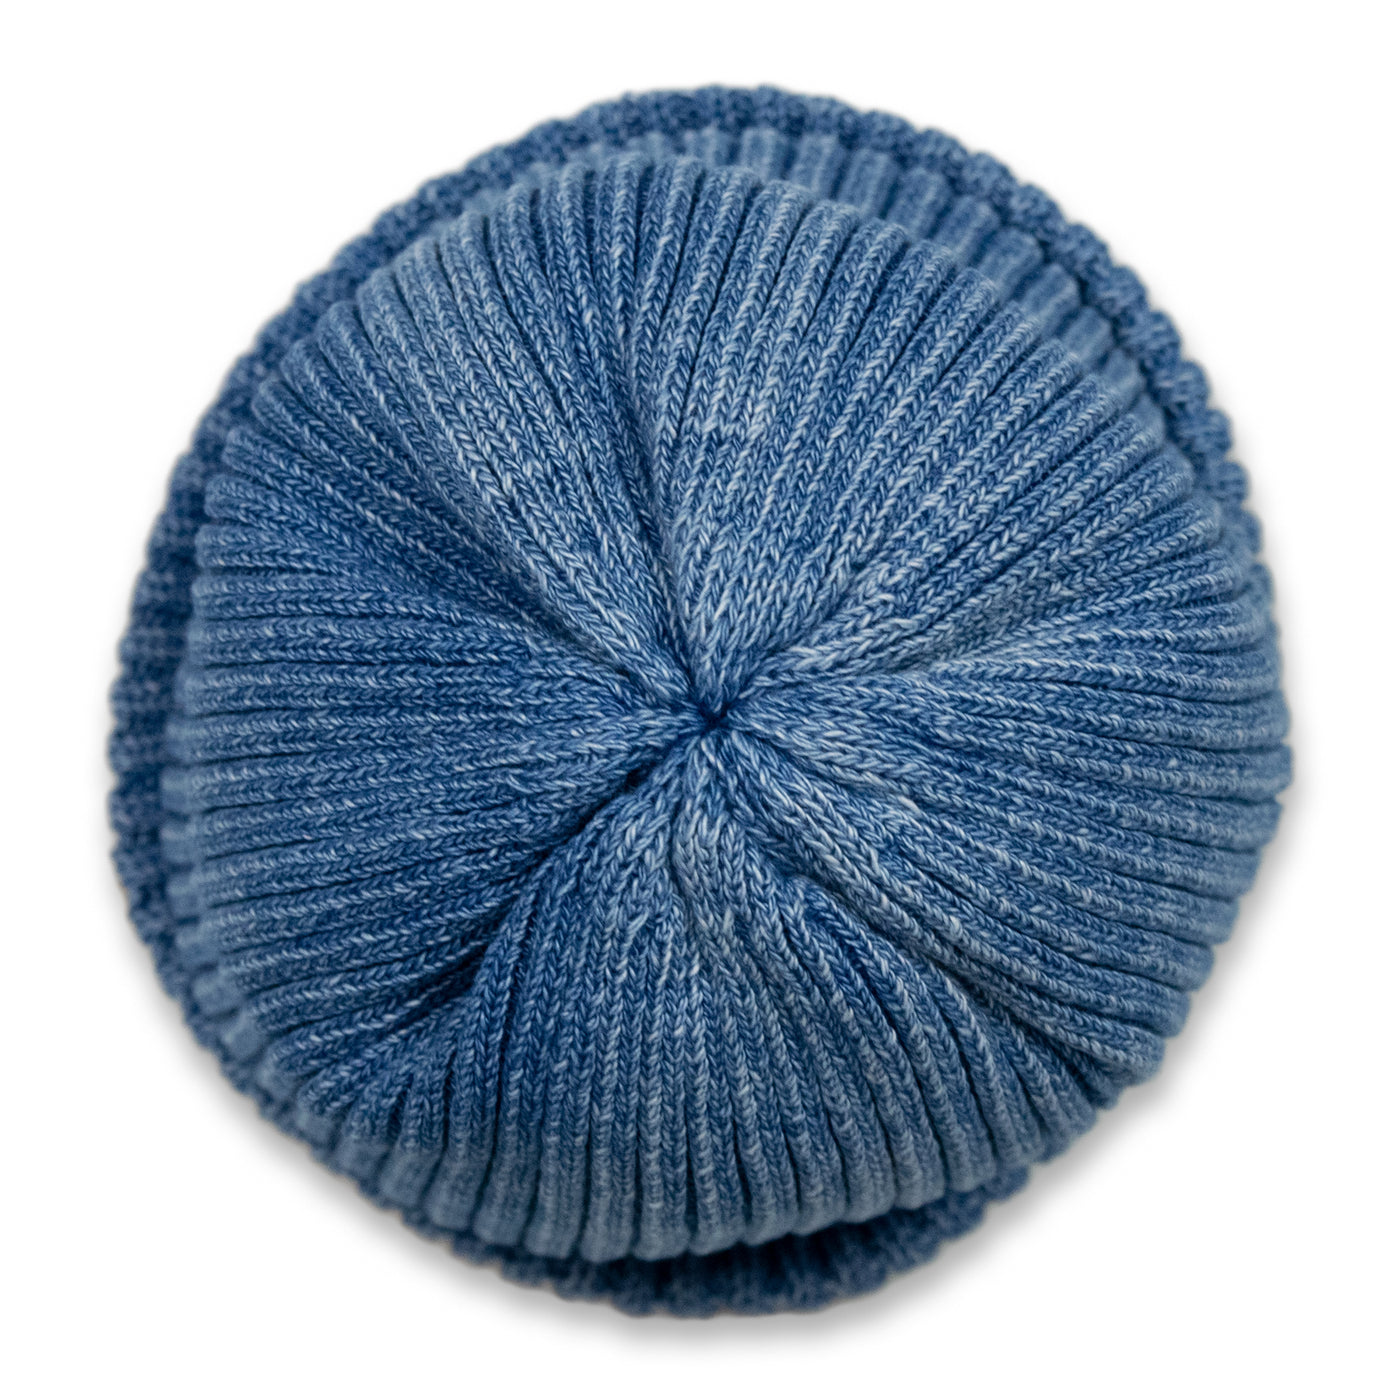  Rototo Cotton Roll Up Beanie Dyed Light Denim TOP VIEW